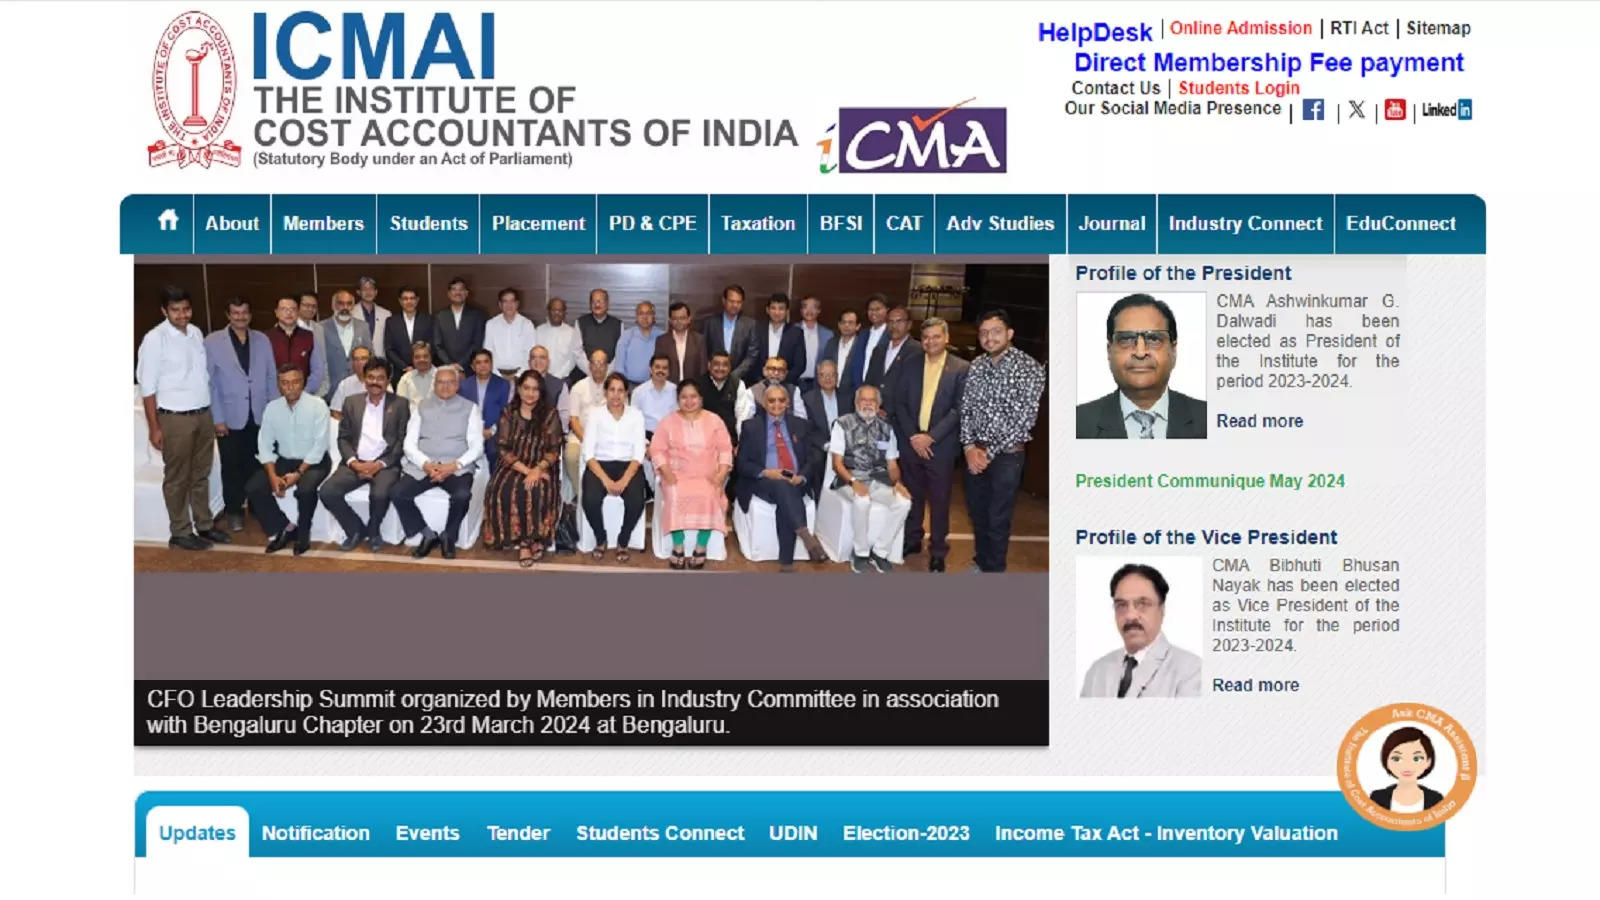 ICMAI CMA June 2024 Admit Card released, here is the direct link